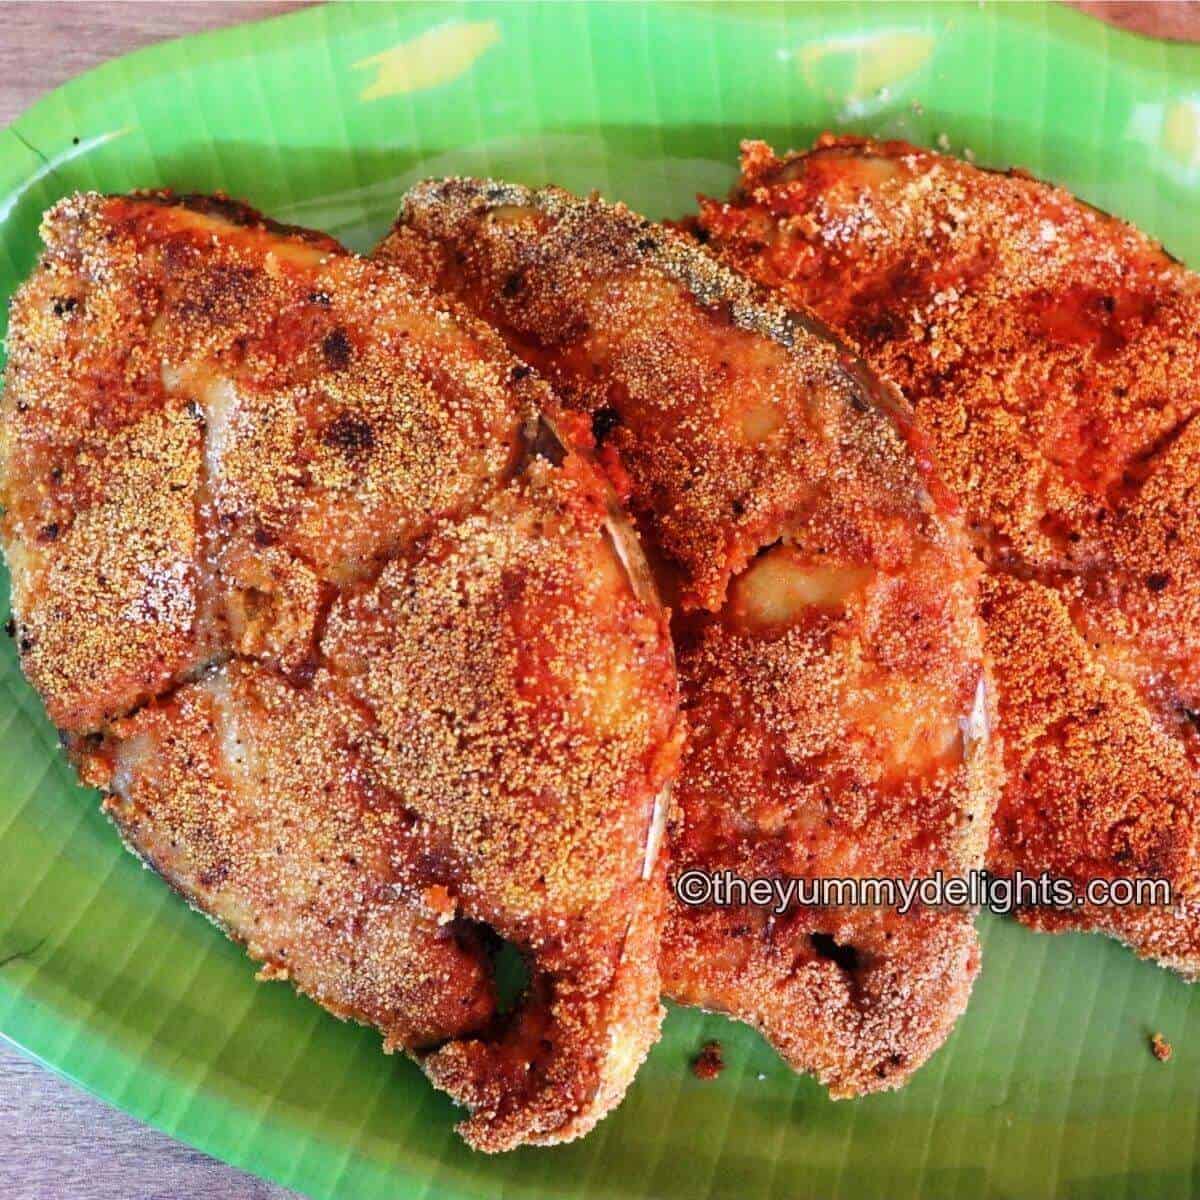 Manglorean rava fish fry served on a green colored plate.